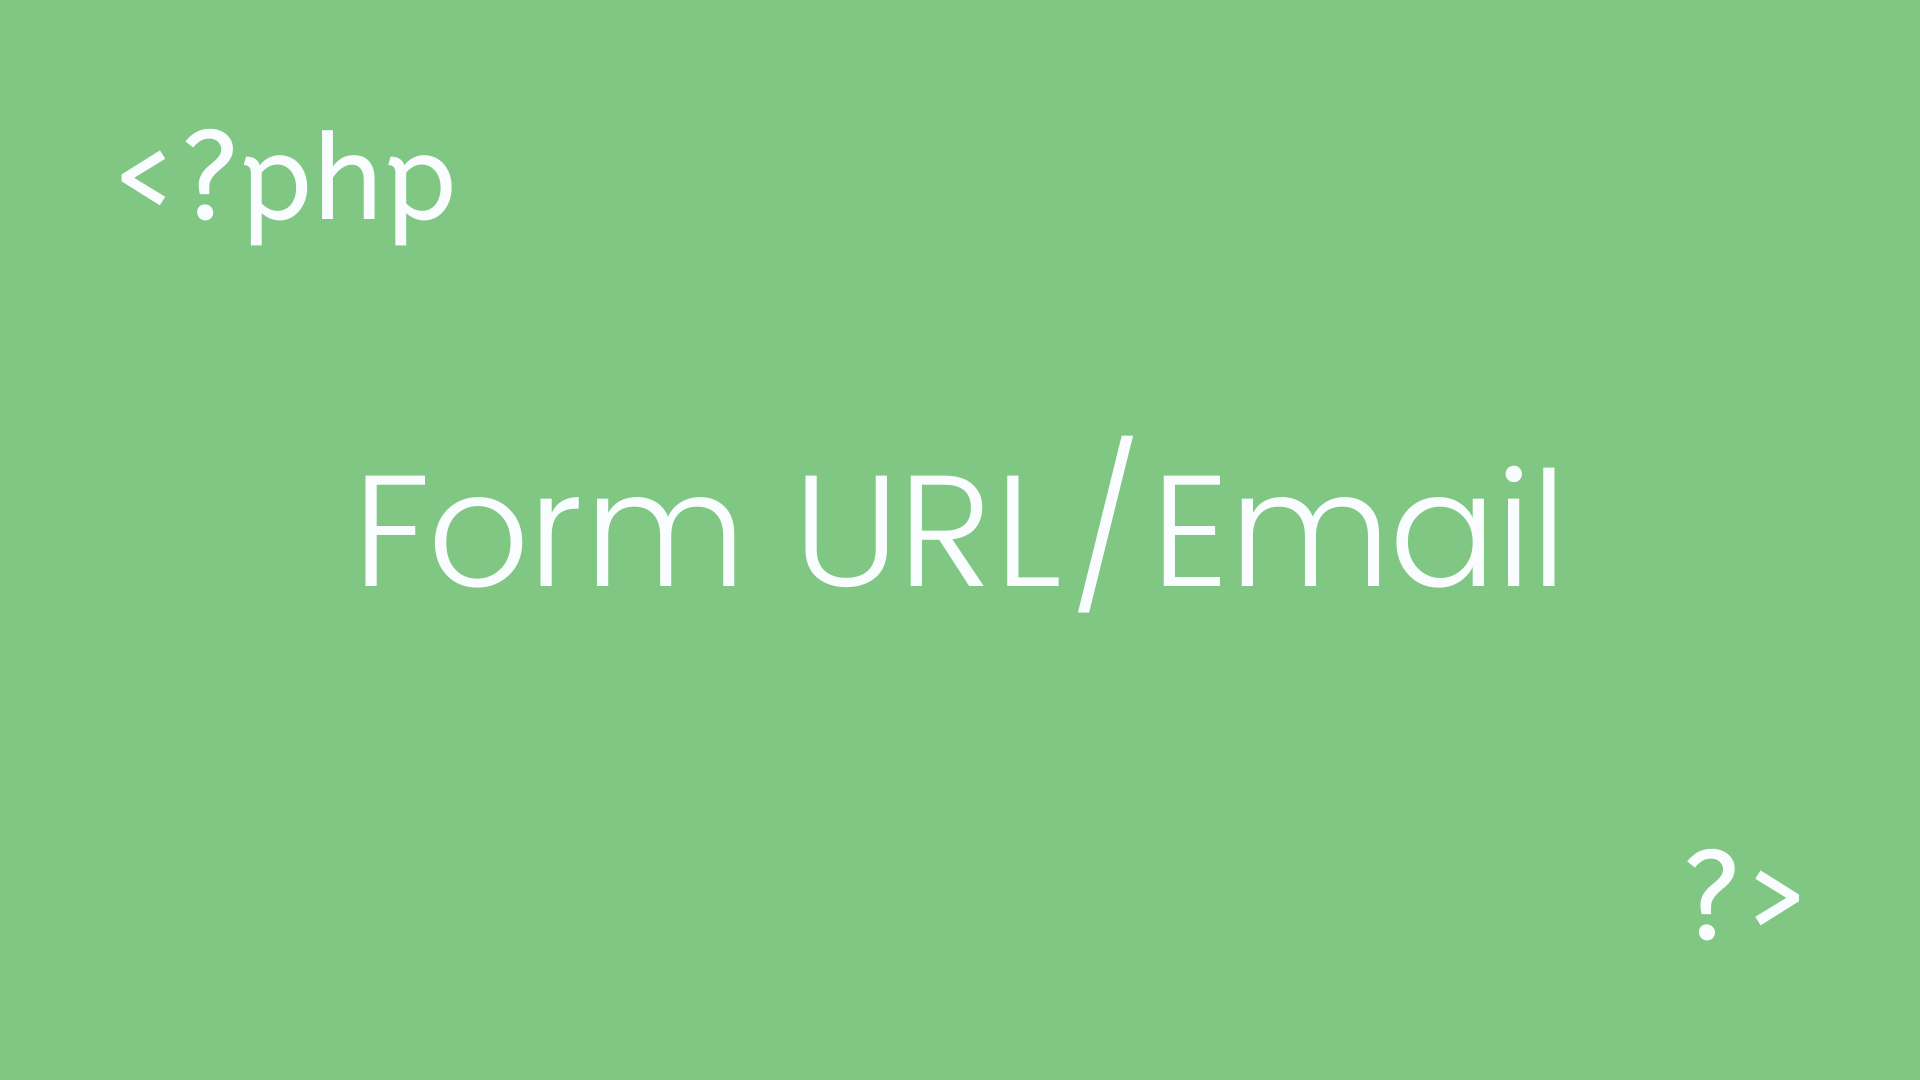 PHP Form URL/Email